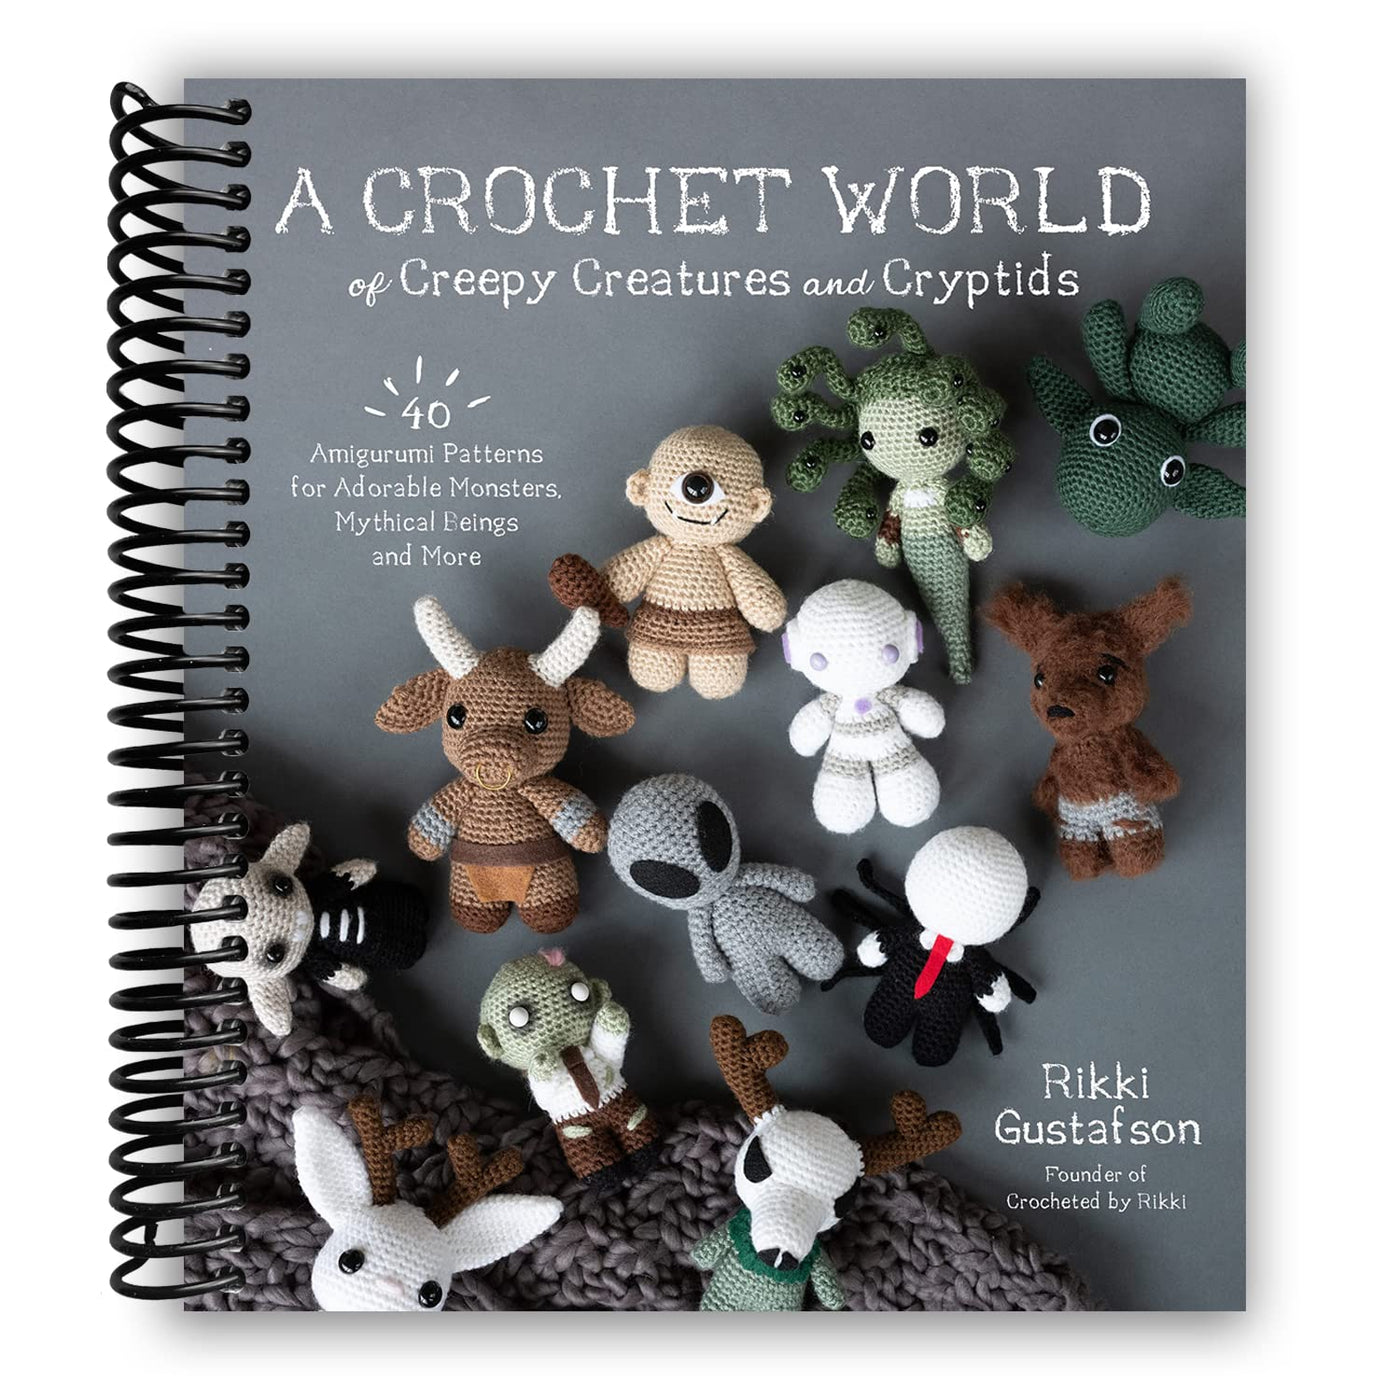 The Woobles Crochet Amigurumi for Every Occasion: Book Review